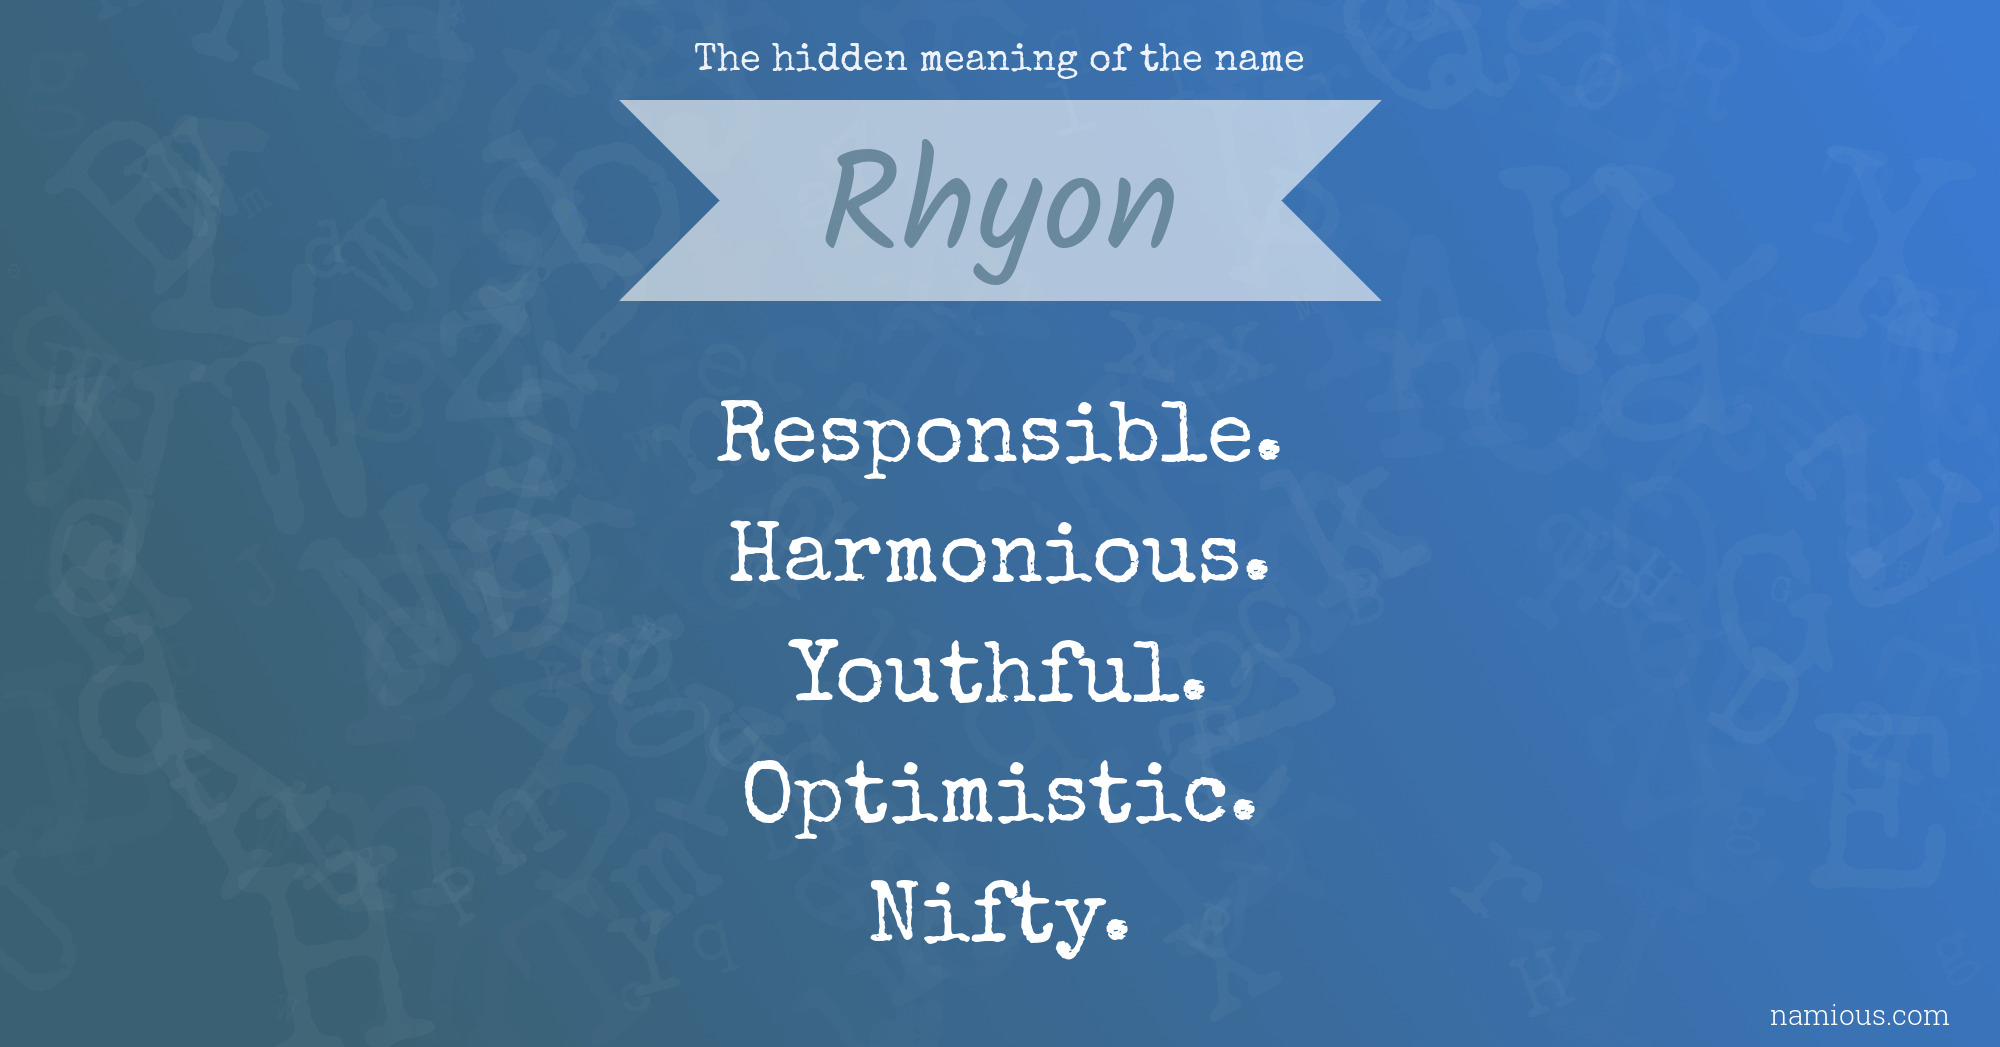 The hidden meaning of the name Rhyon